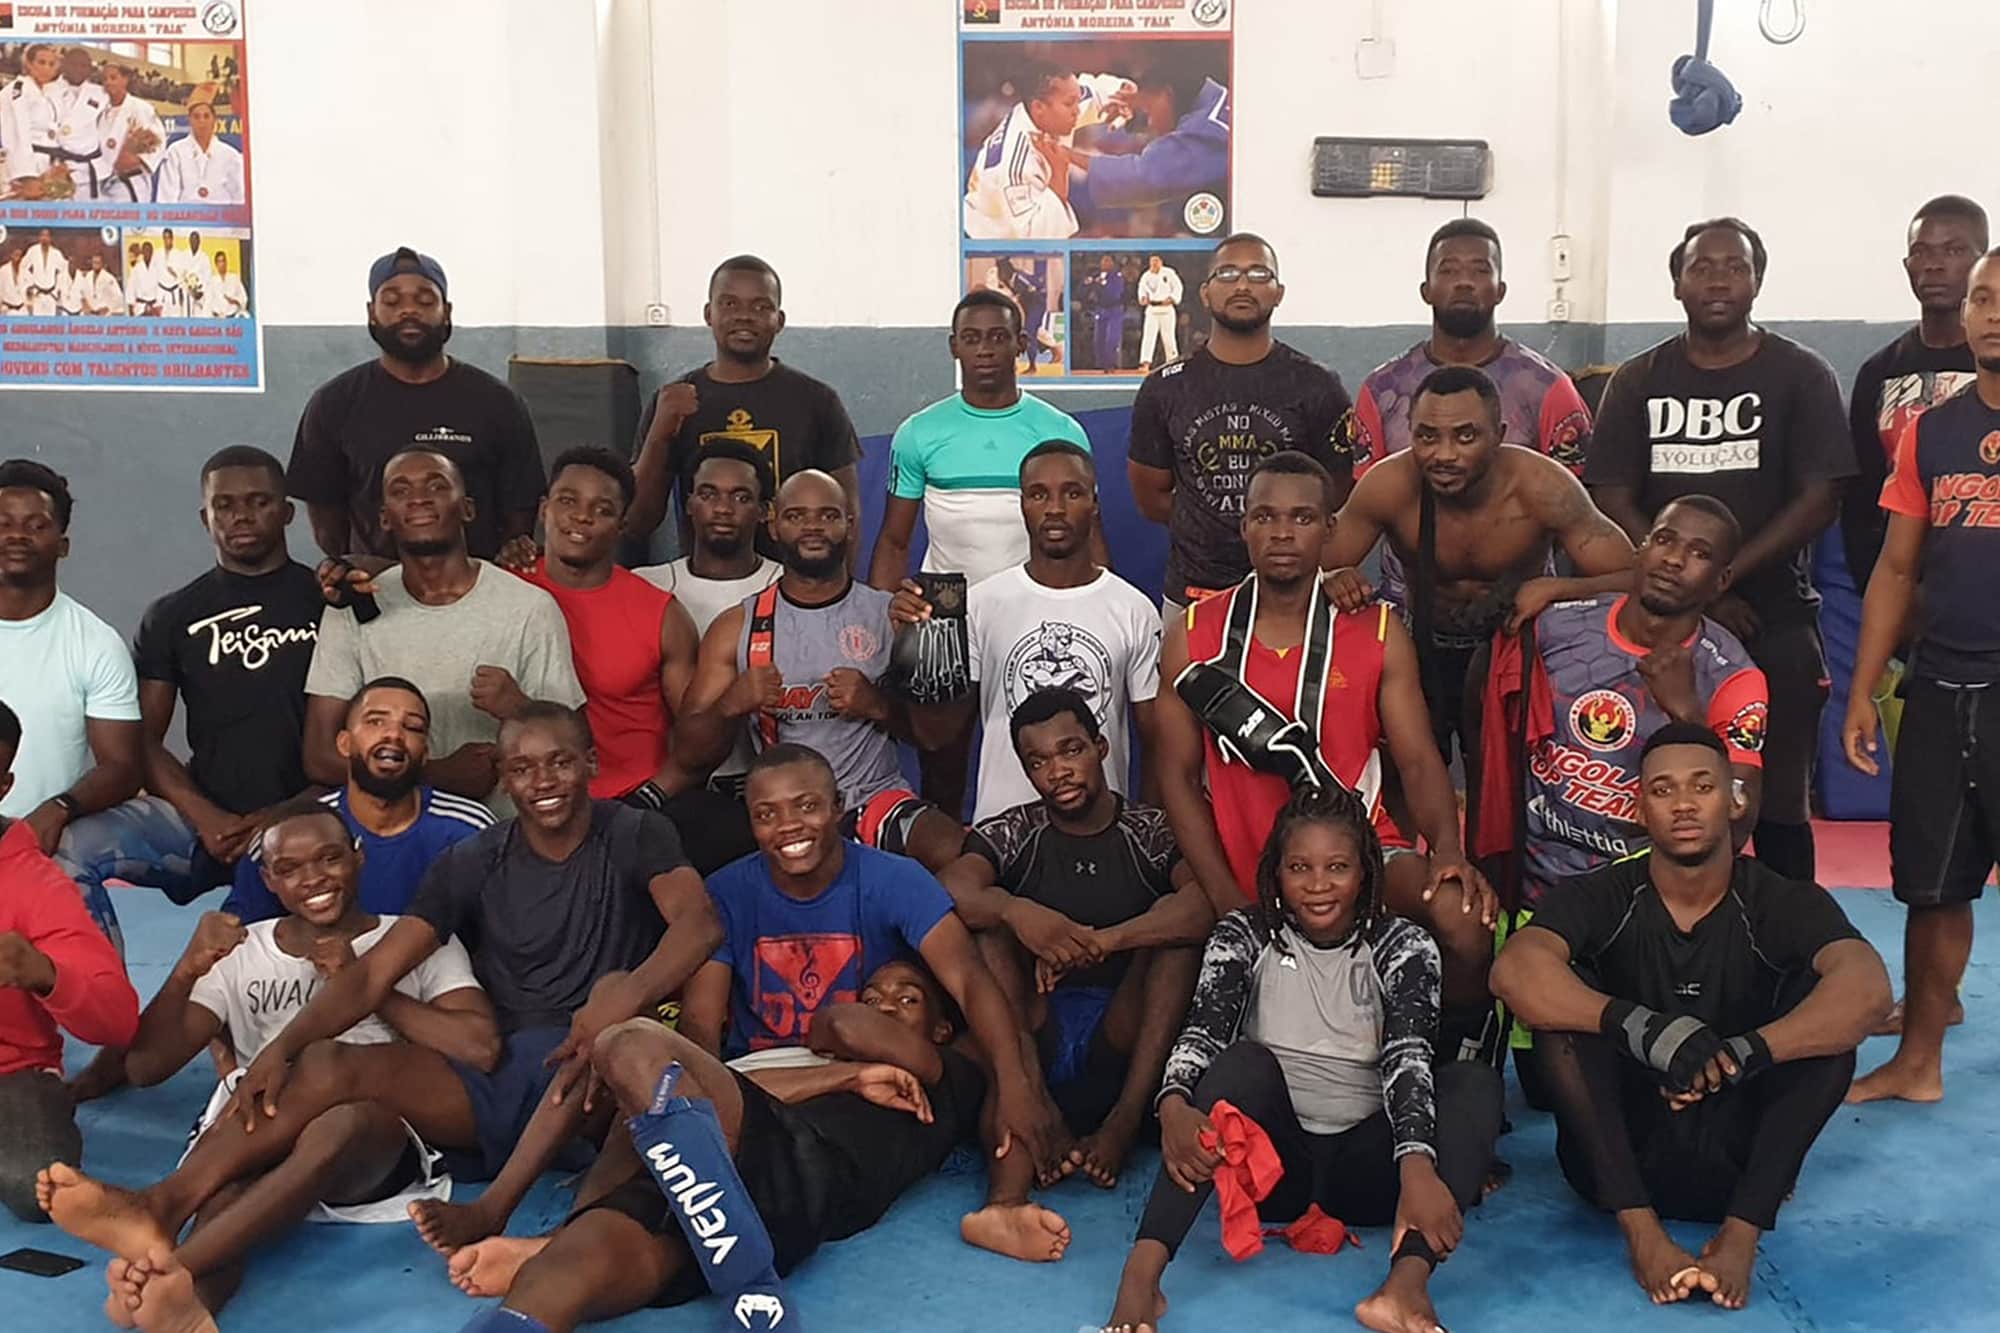 Angola Looking To Take Top Spot In First IMMAF Africa Championships Appearance